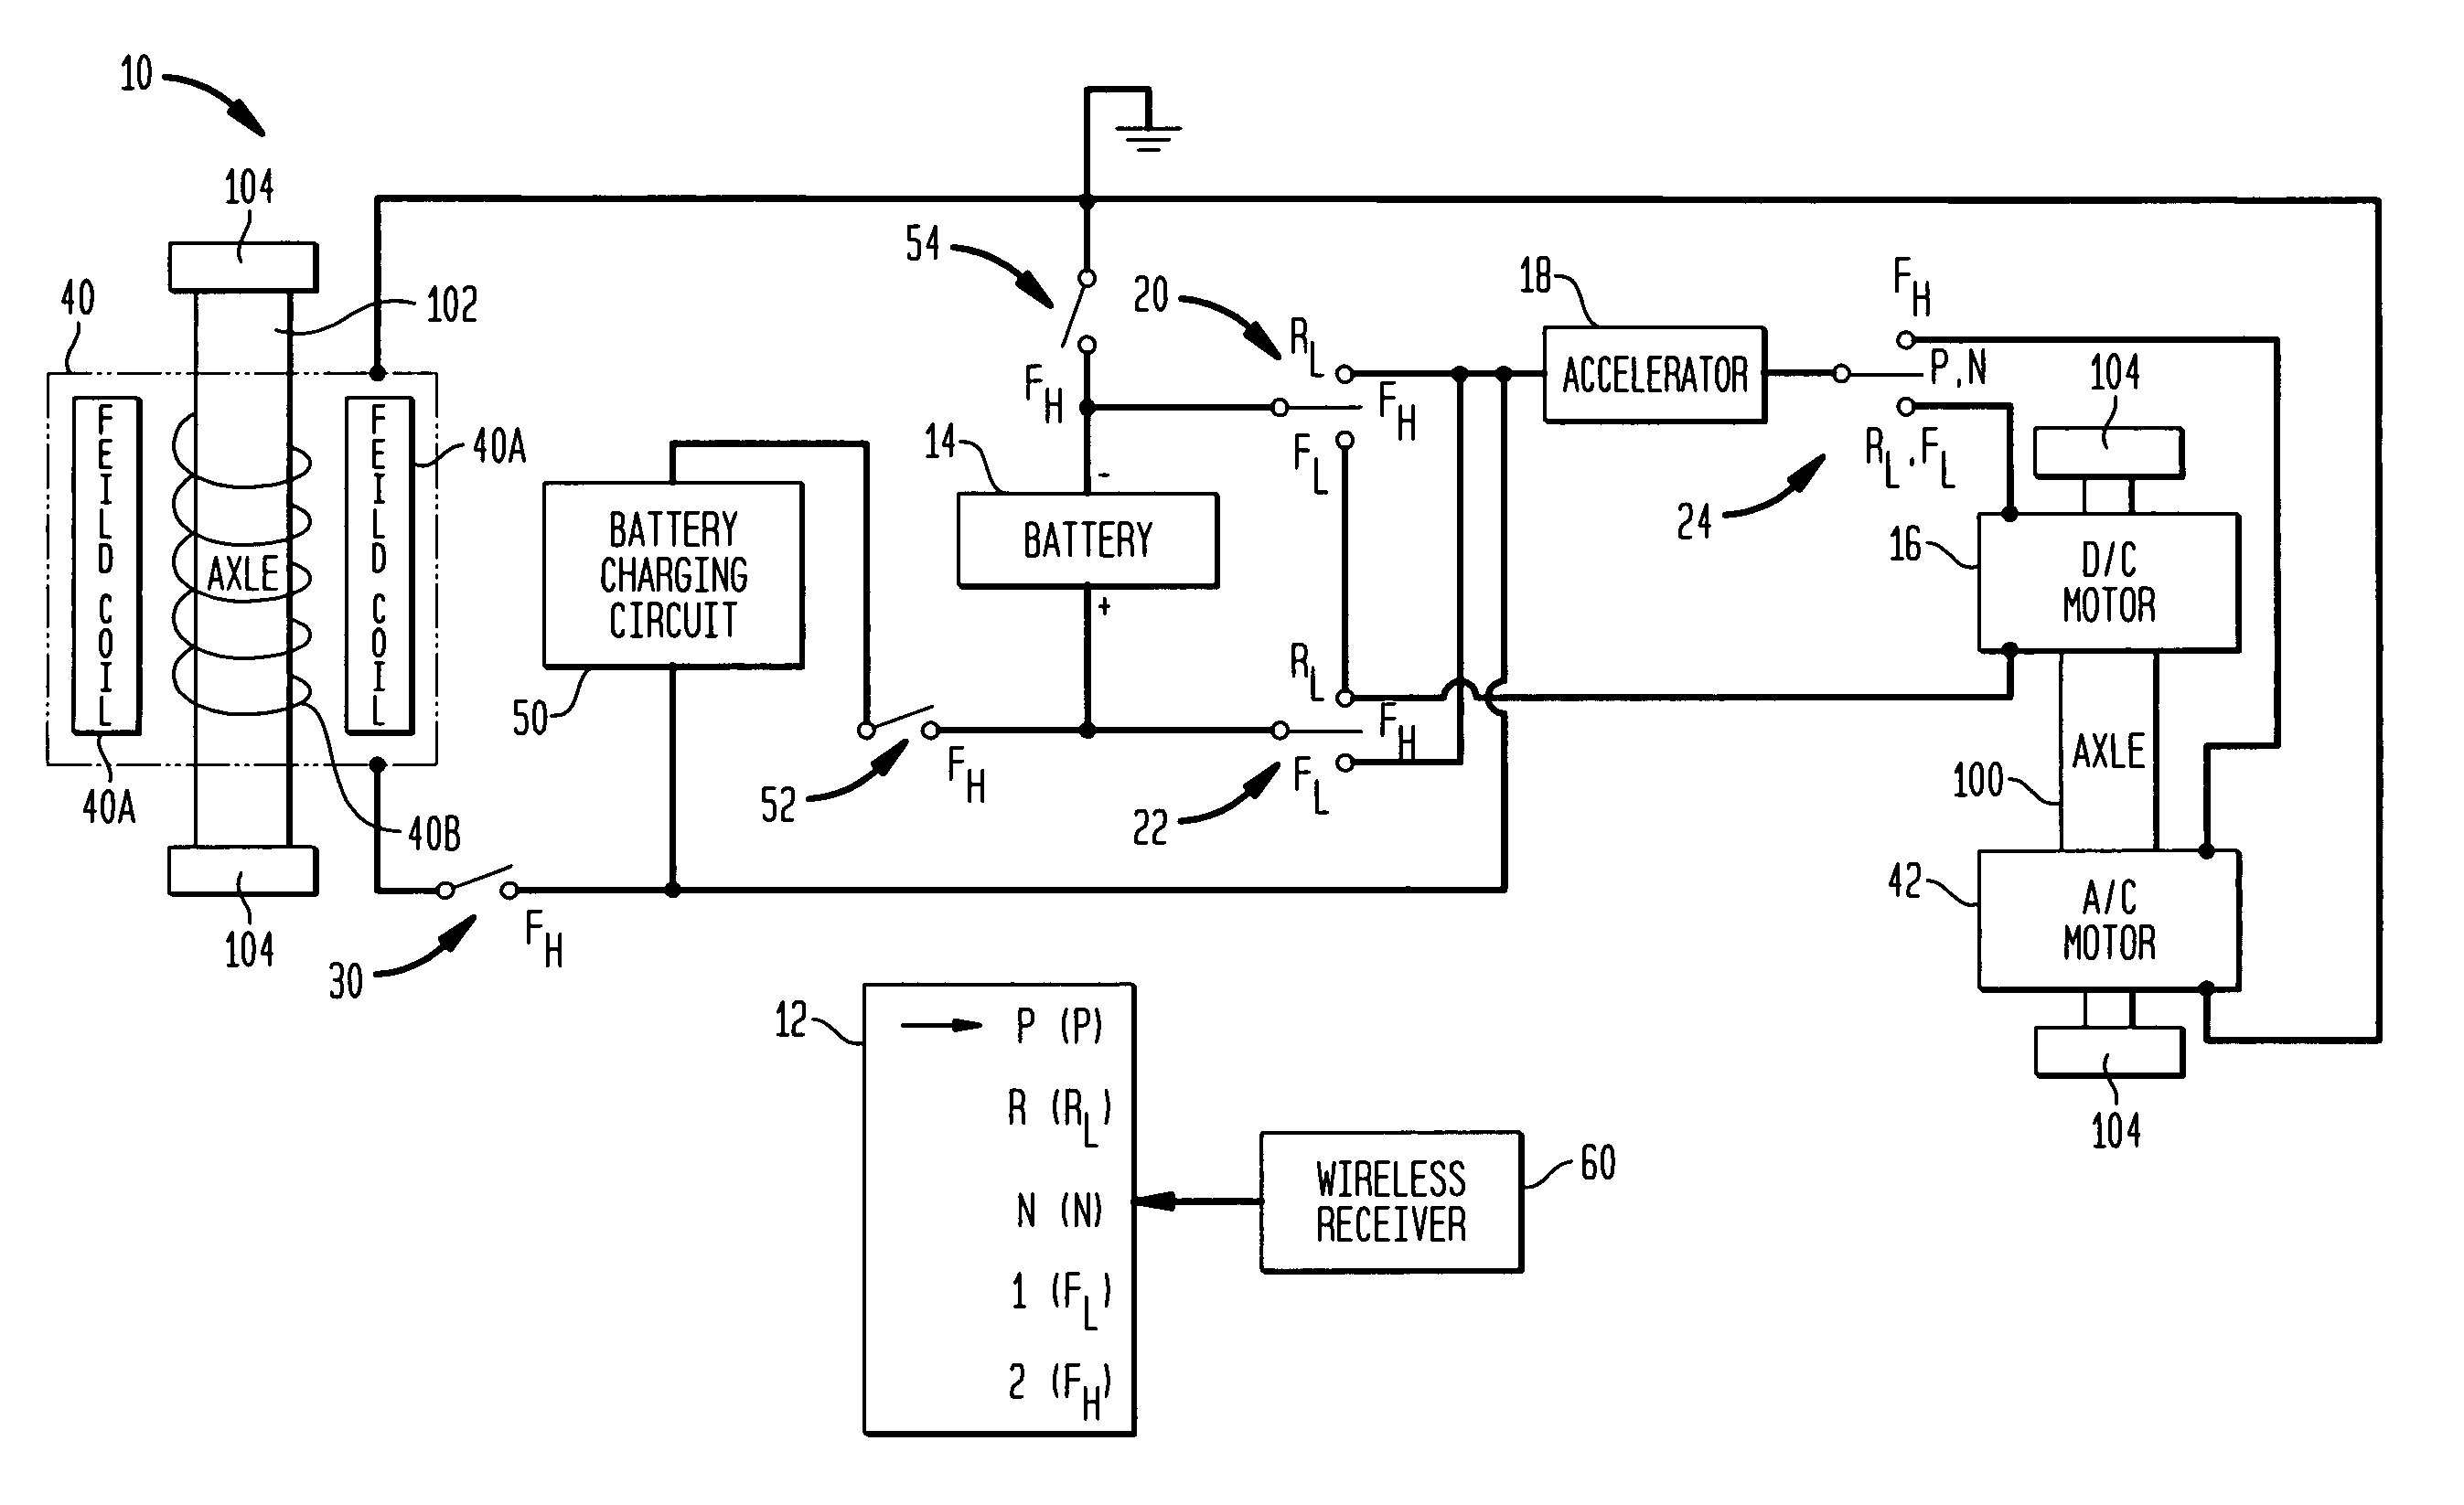 AC/DC system for powering a vehicle